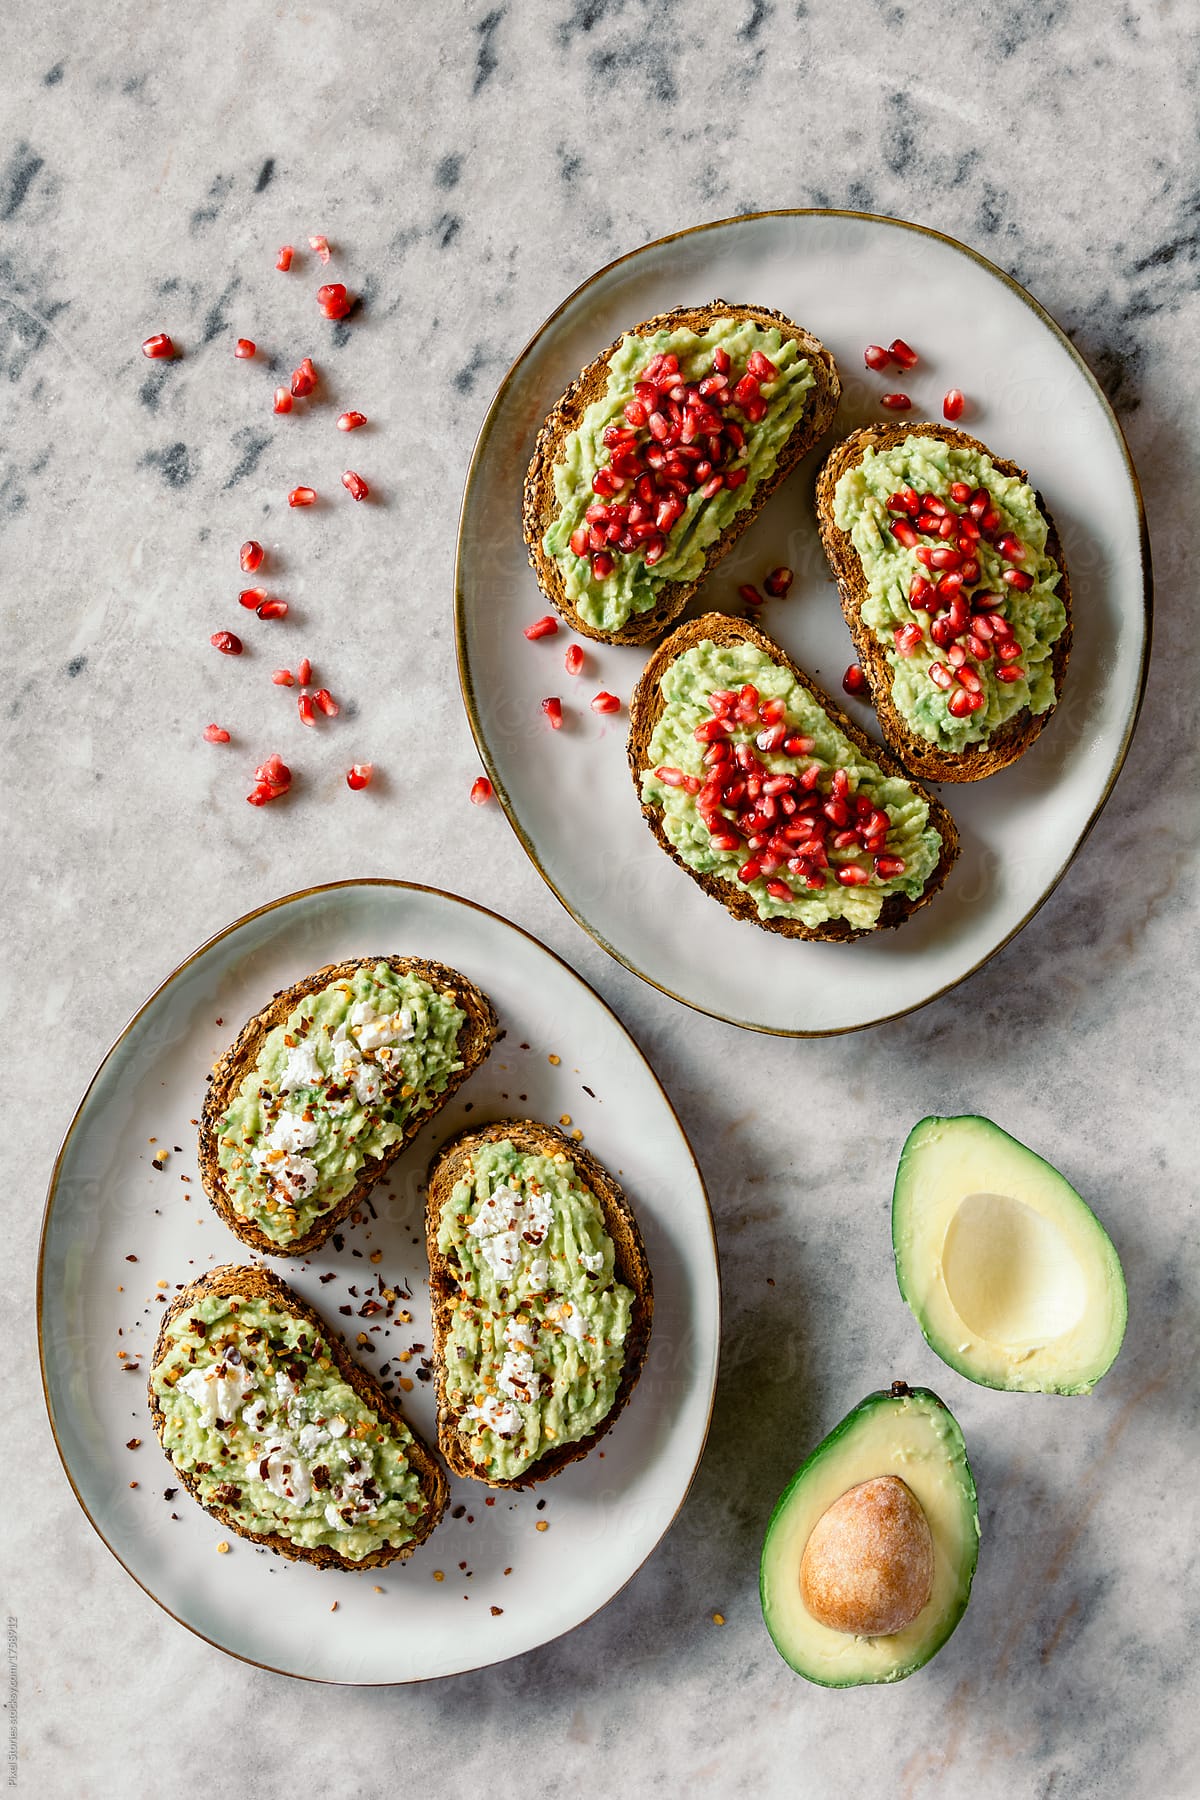 Avocado sandwiches with pomegranate seeds and white cheese